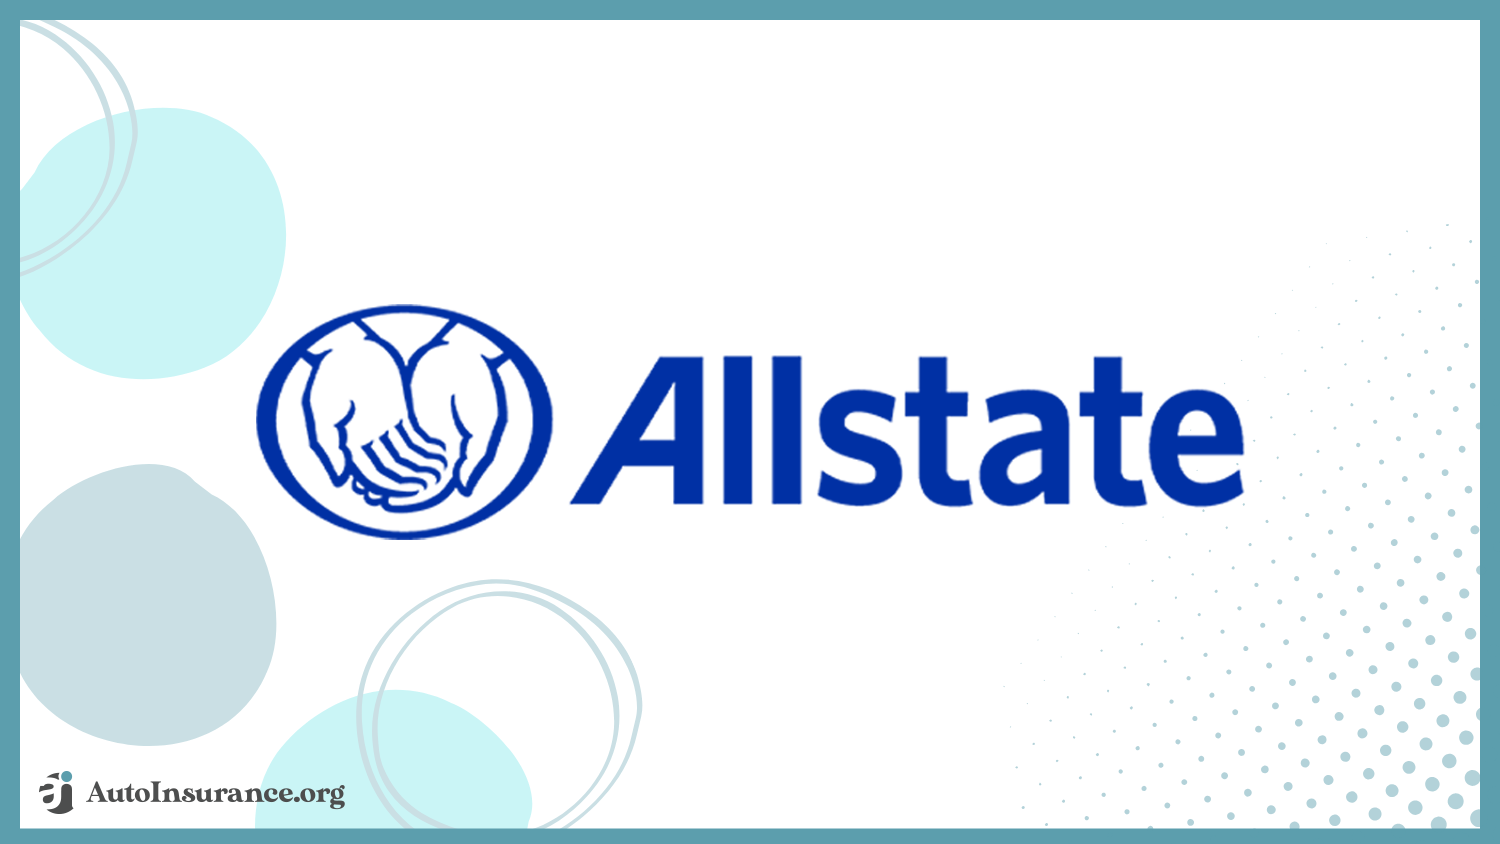 Cheap Auto Insurance For Bus Drivers: Allstate